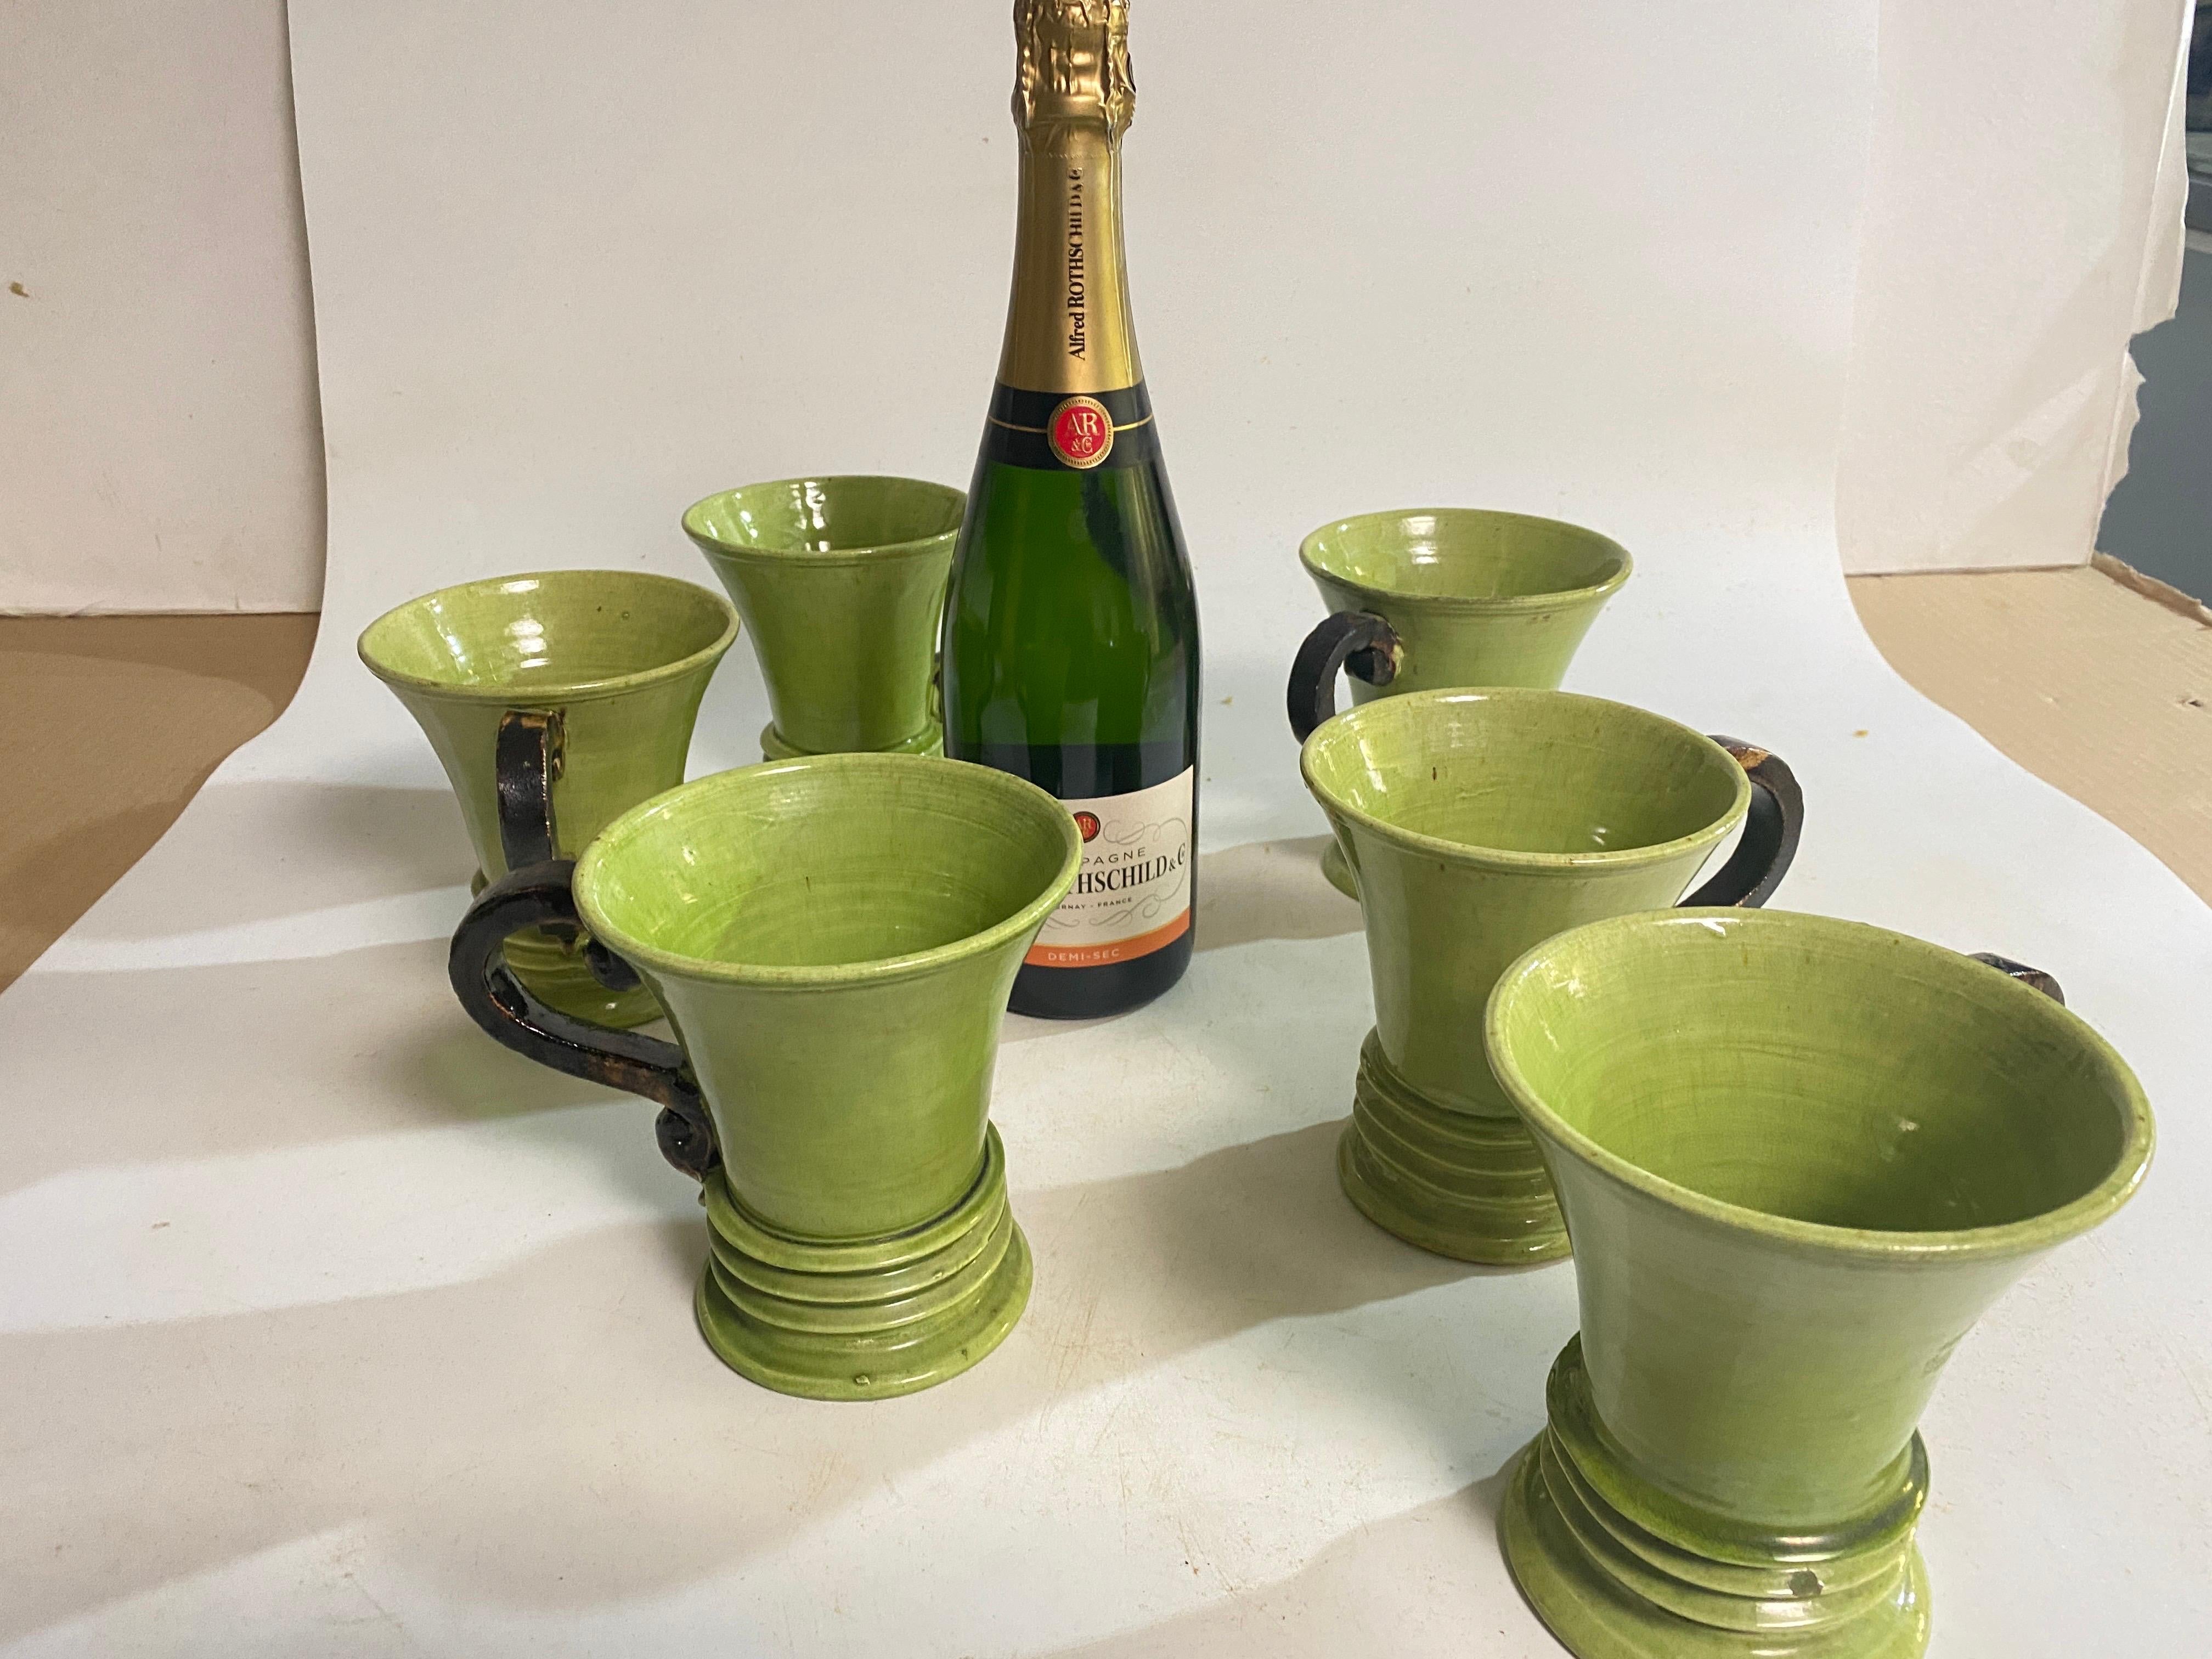 Set of 6 Ceramic Cups, Handmade in France Circa 1970.
The handles of the cup are in a brown Color and the cups are in a  Green Color.